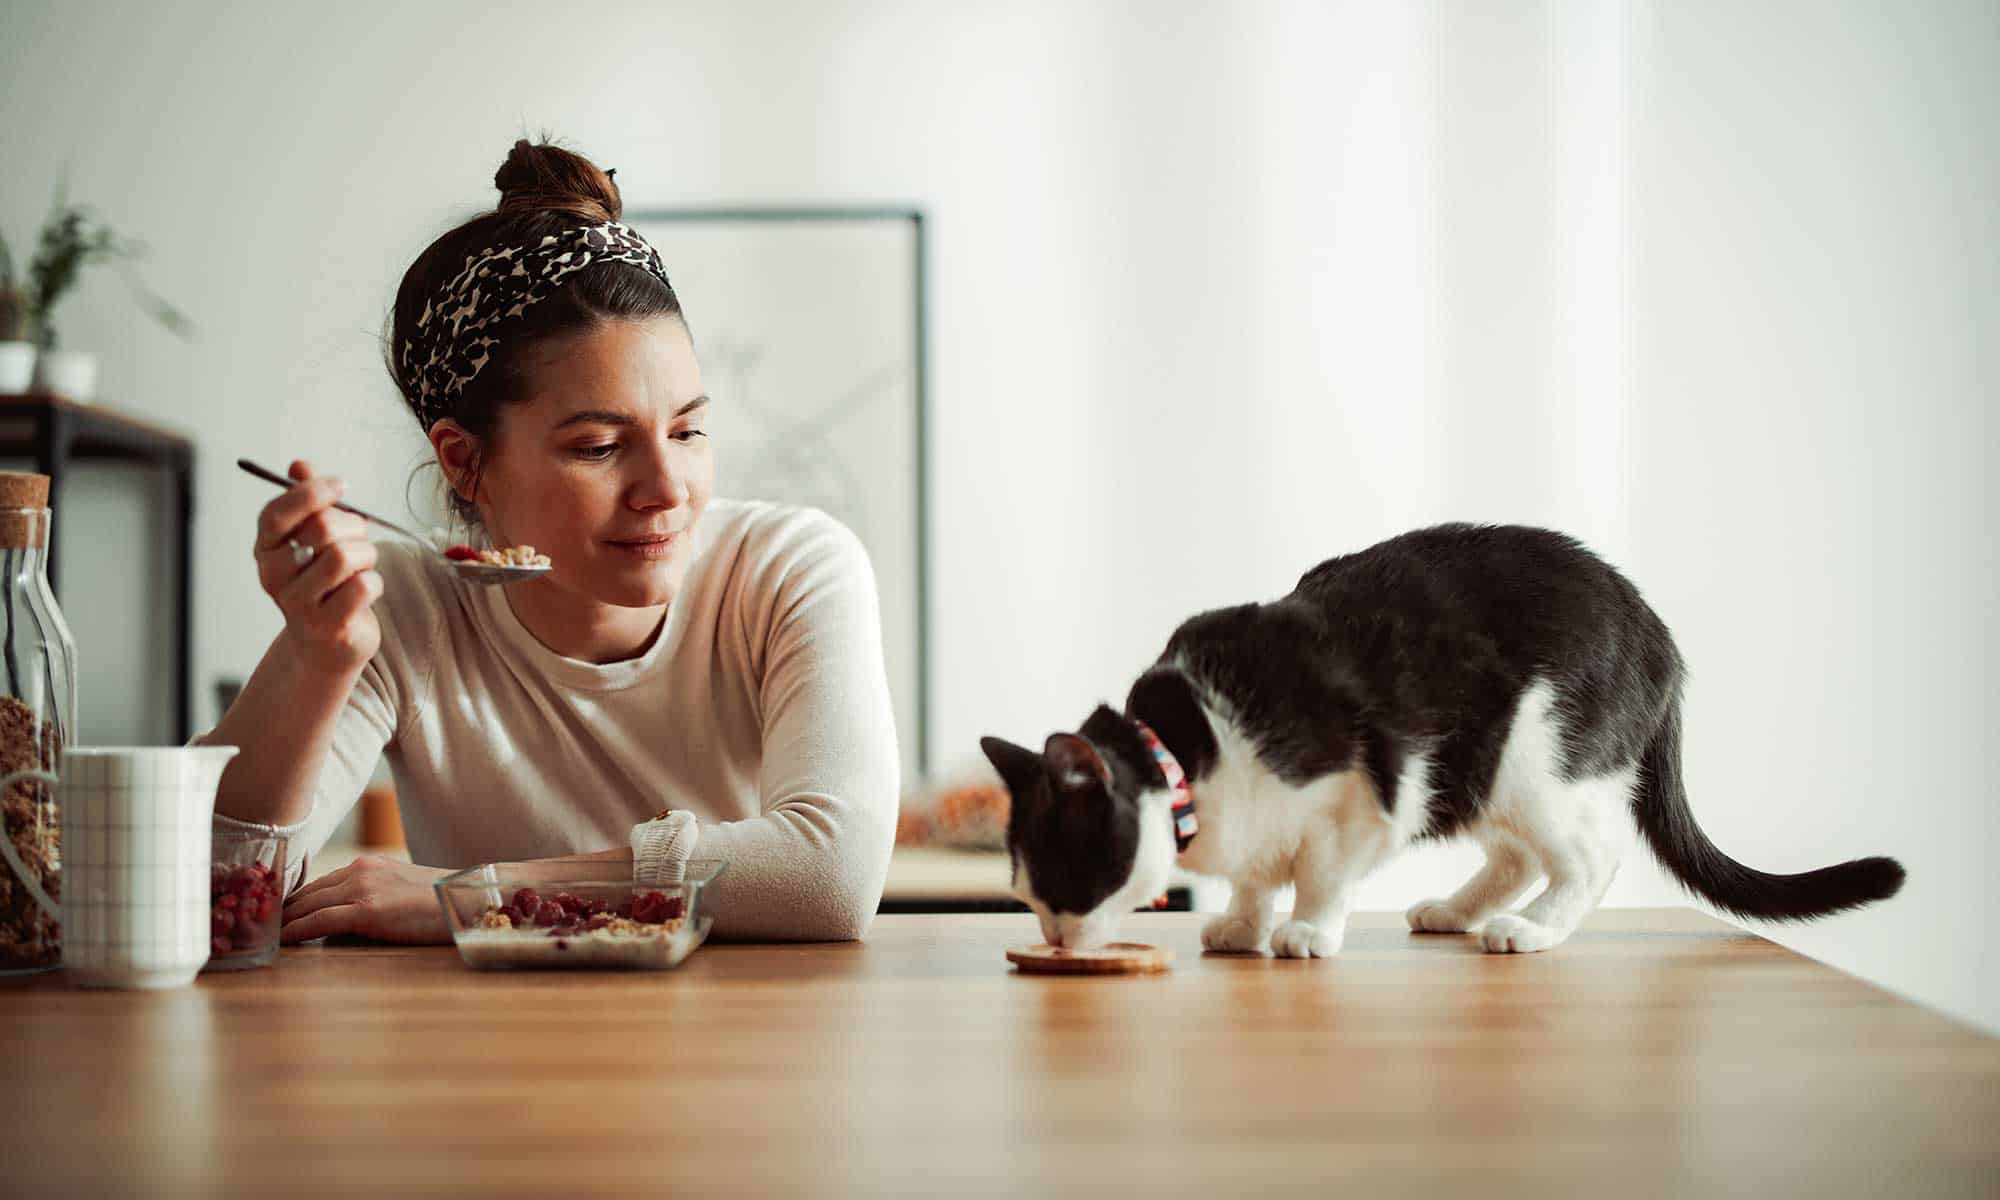 Woman and cat eating a meal